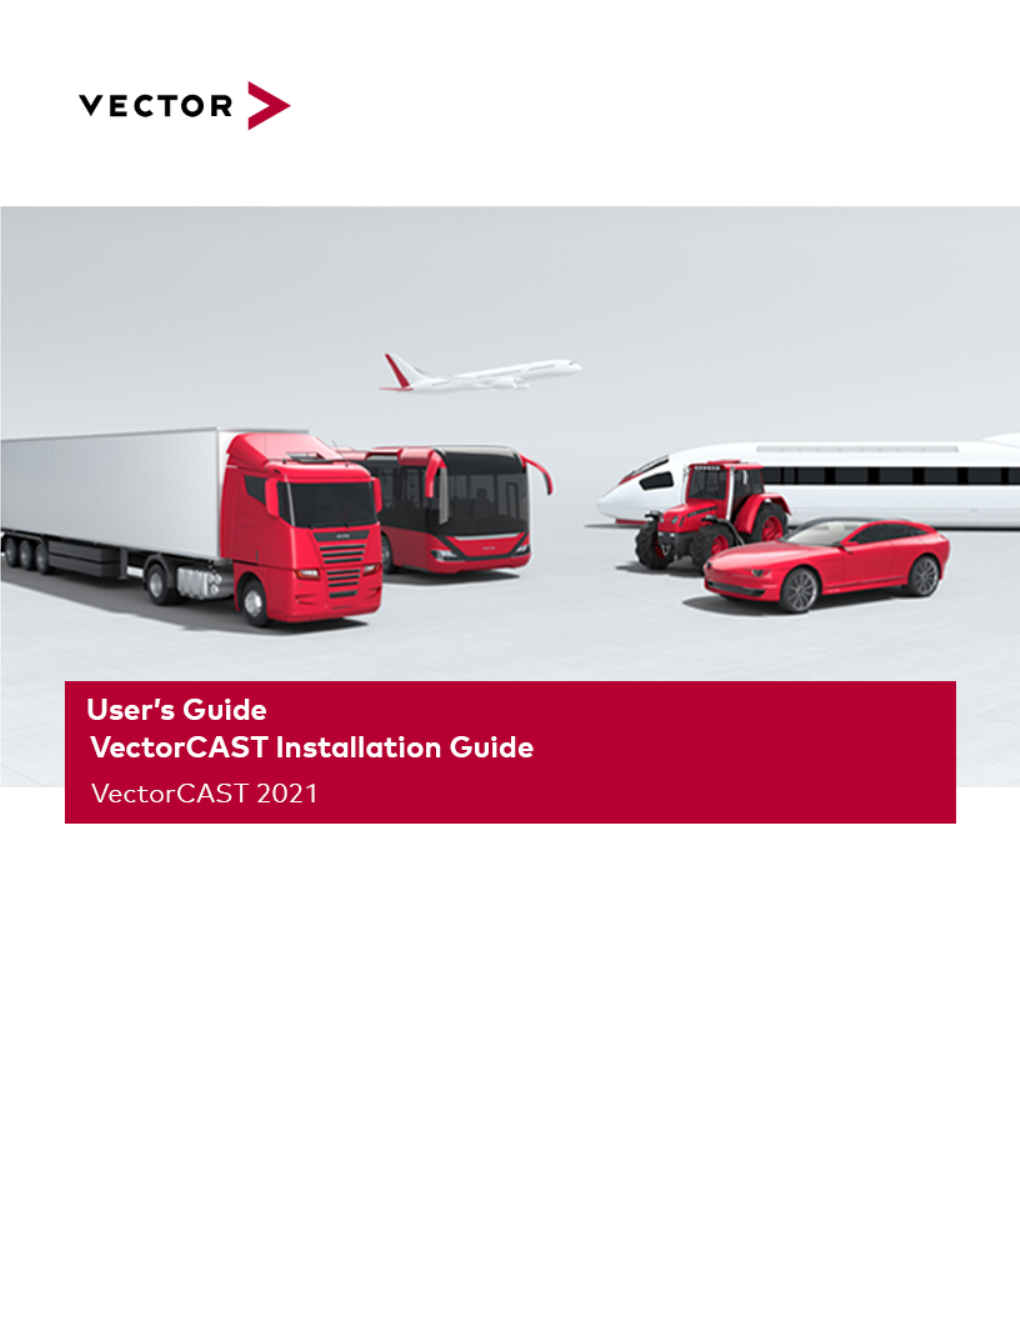 Vectorcast Installation Guide for Vectorcast 2021